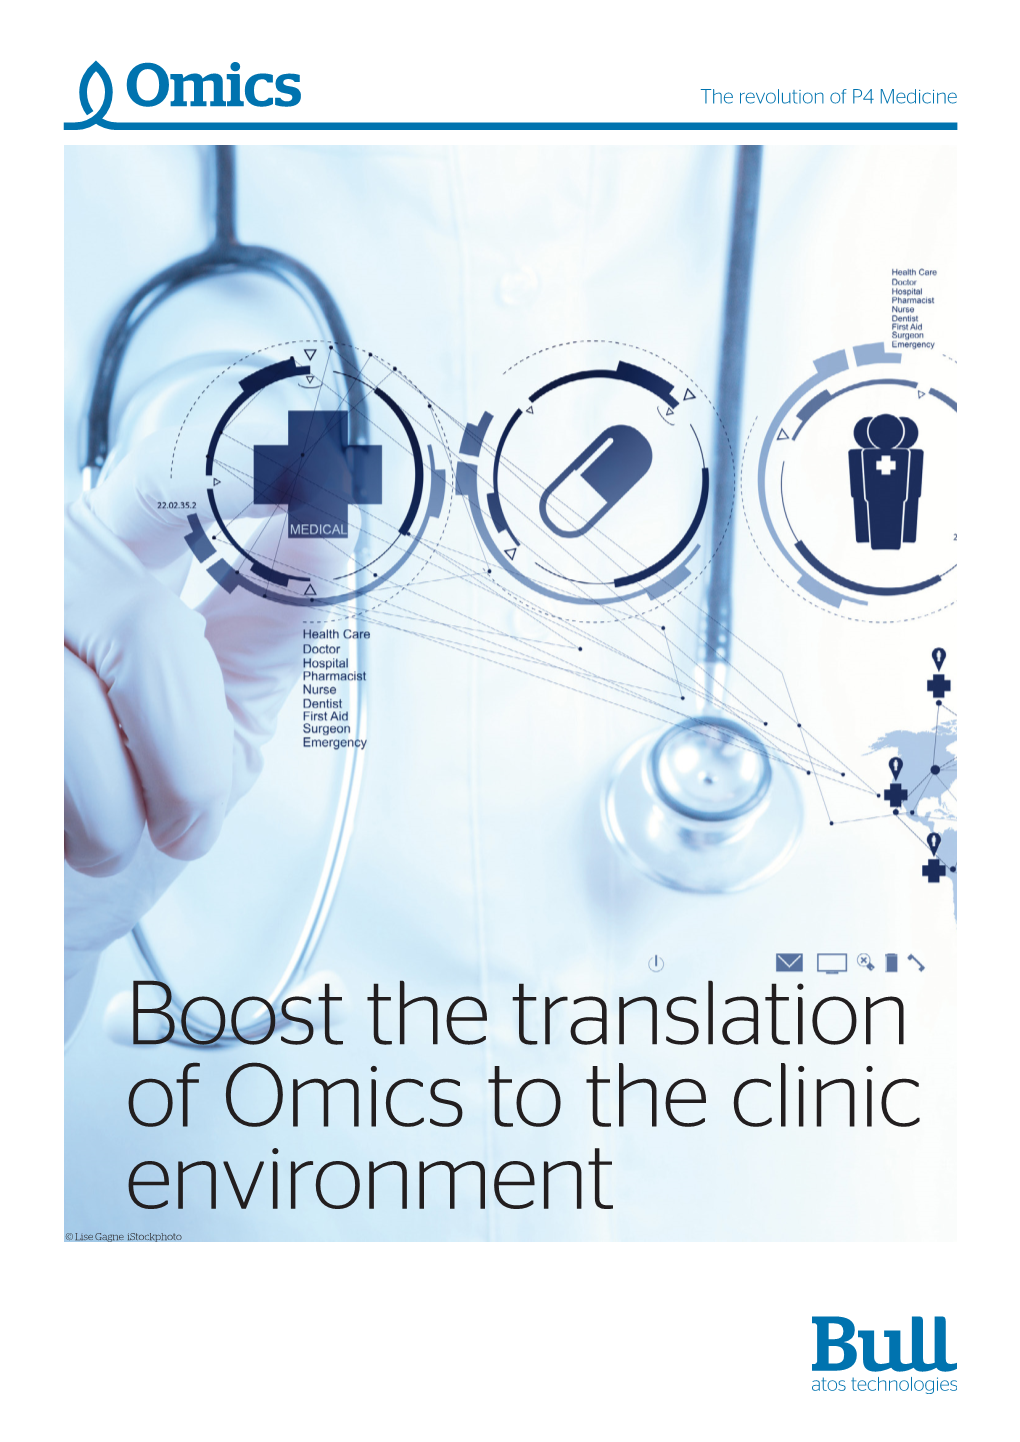 Boost the Translation of Omics to the Clinic Environment © Lise Gagne Istockphoto Deal with the Unsustainable Upward Climb